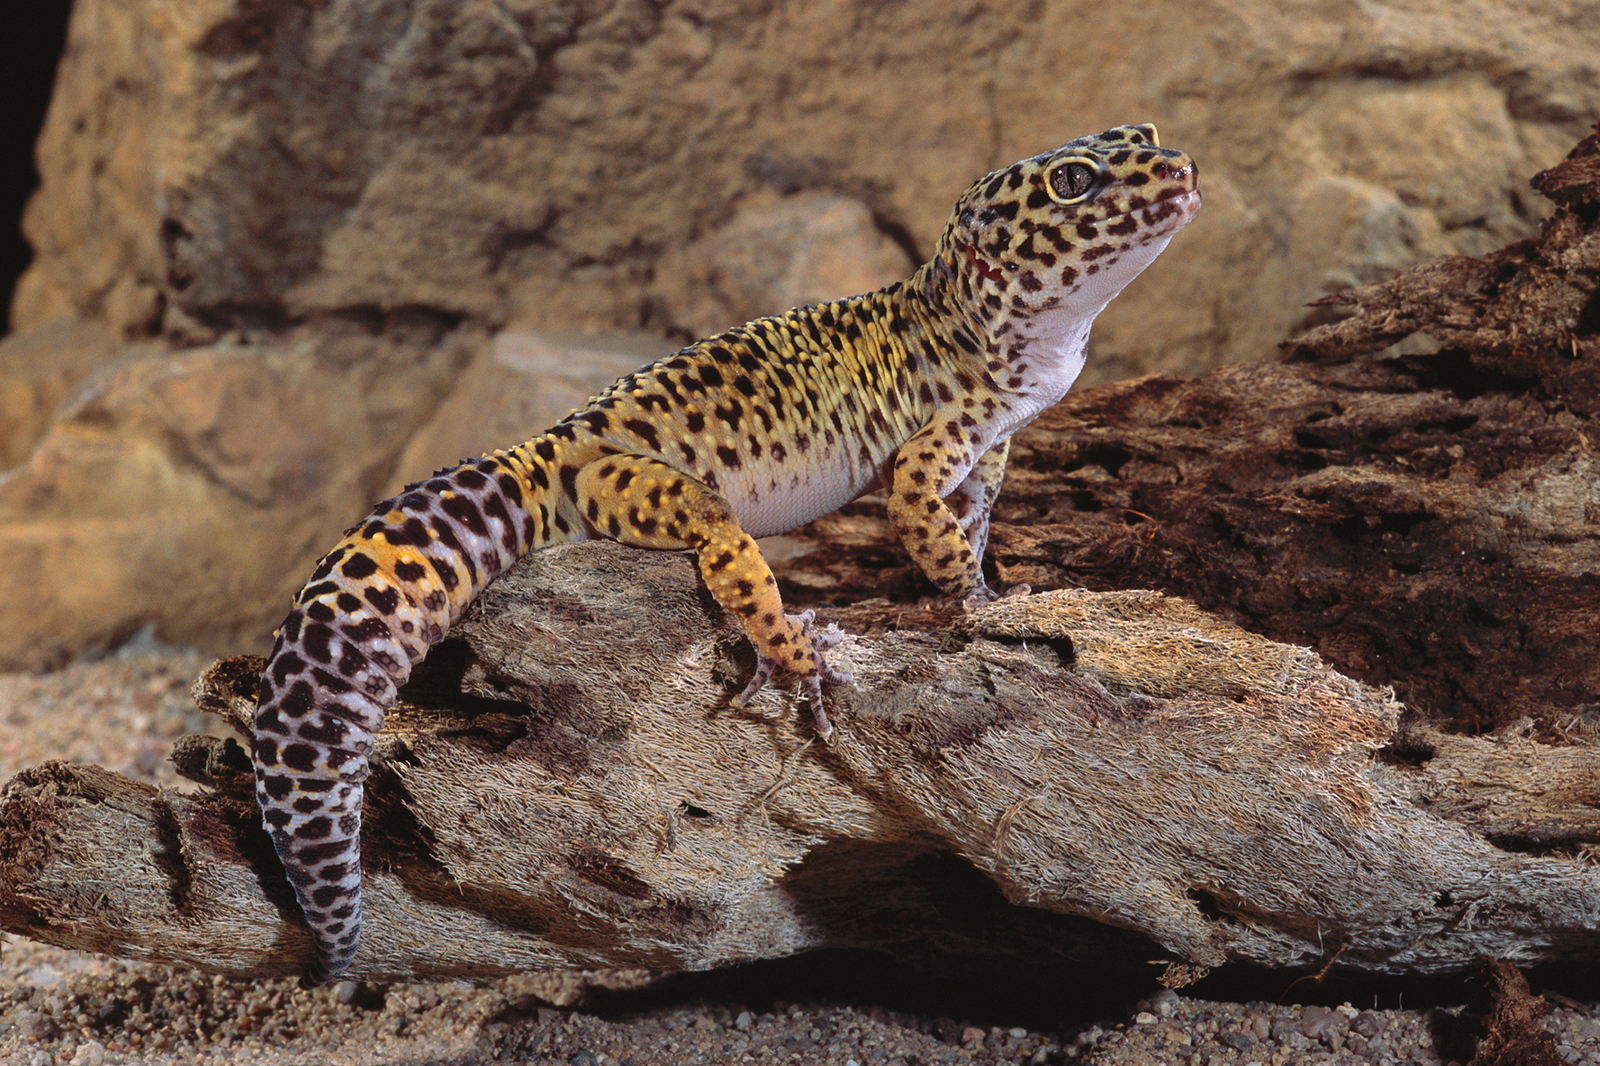 Leopard Gecko Facts: A Little Lizard With a Big Personality